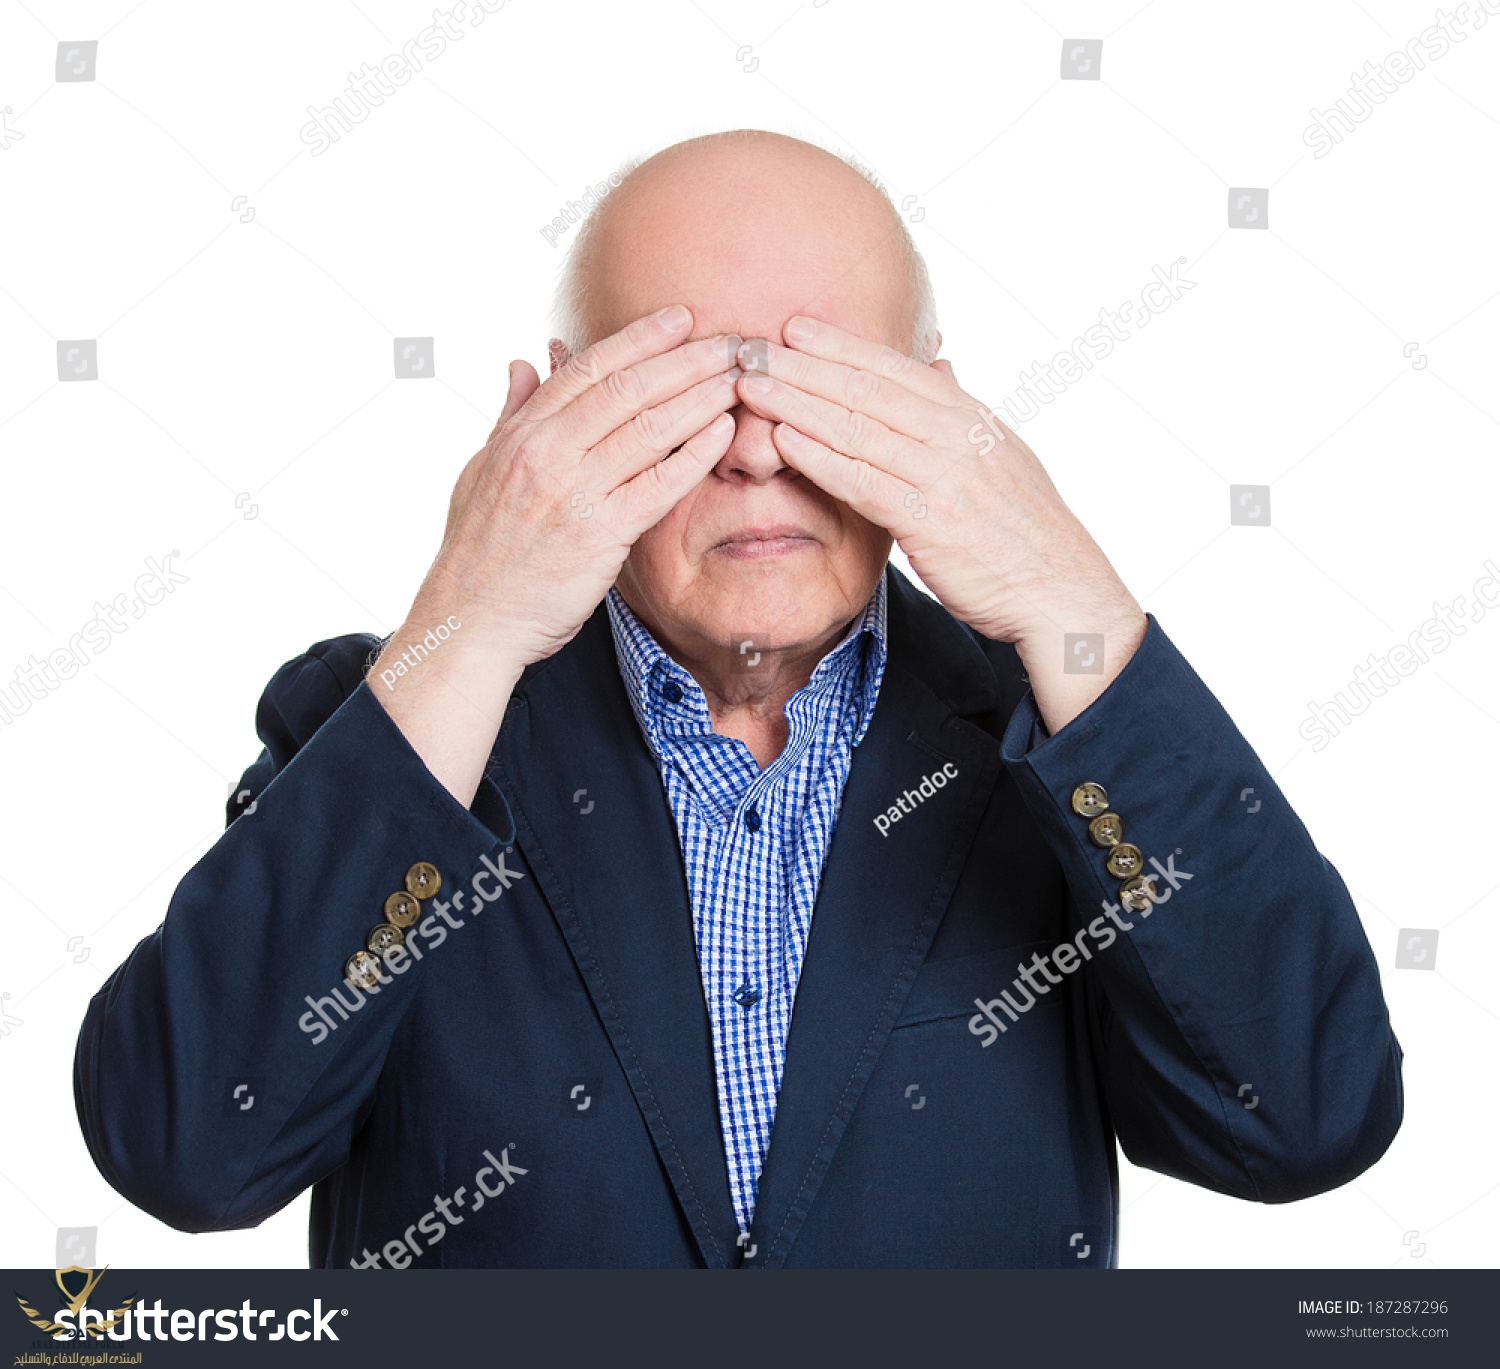 stock-photo-closeup-portrait-senior-mature-shy-man-closing-covering-eyes-with-hands-can-t-see-...jpg